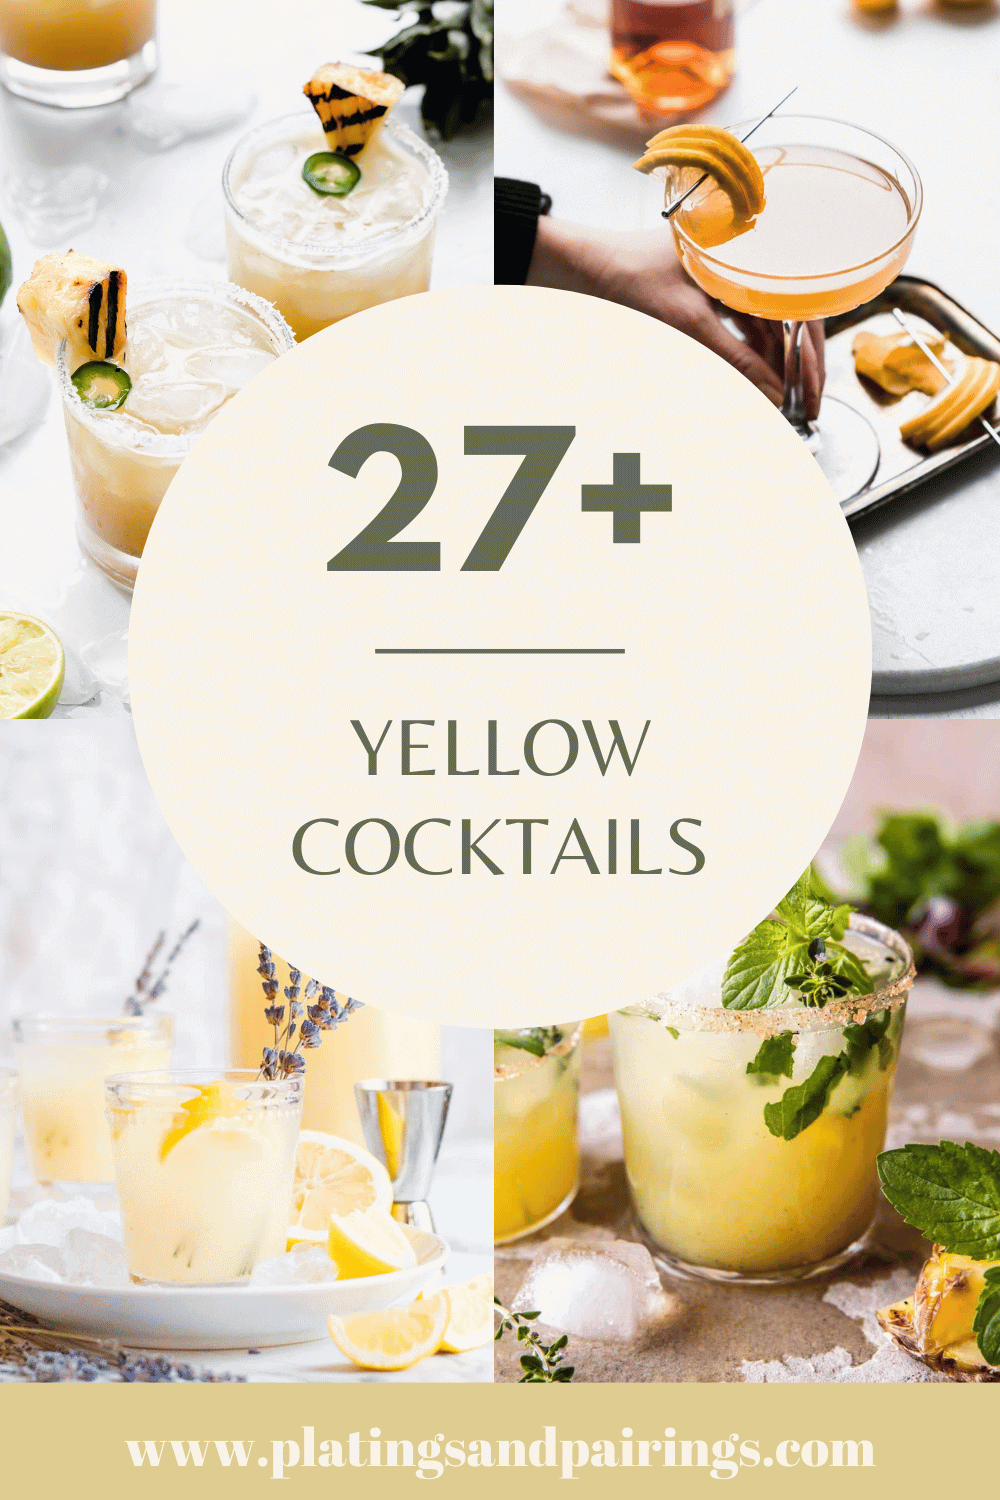 Collage of yellow cocktails with text overlay.